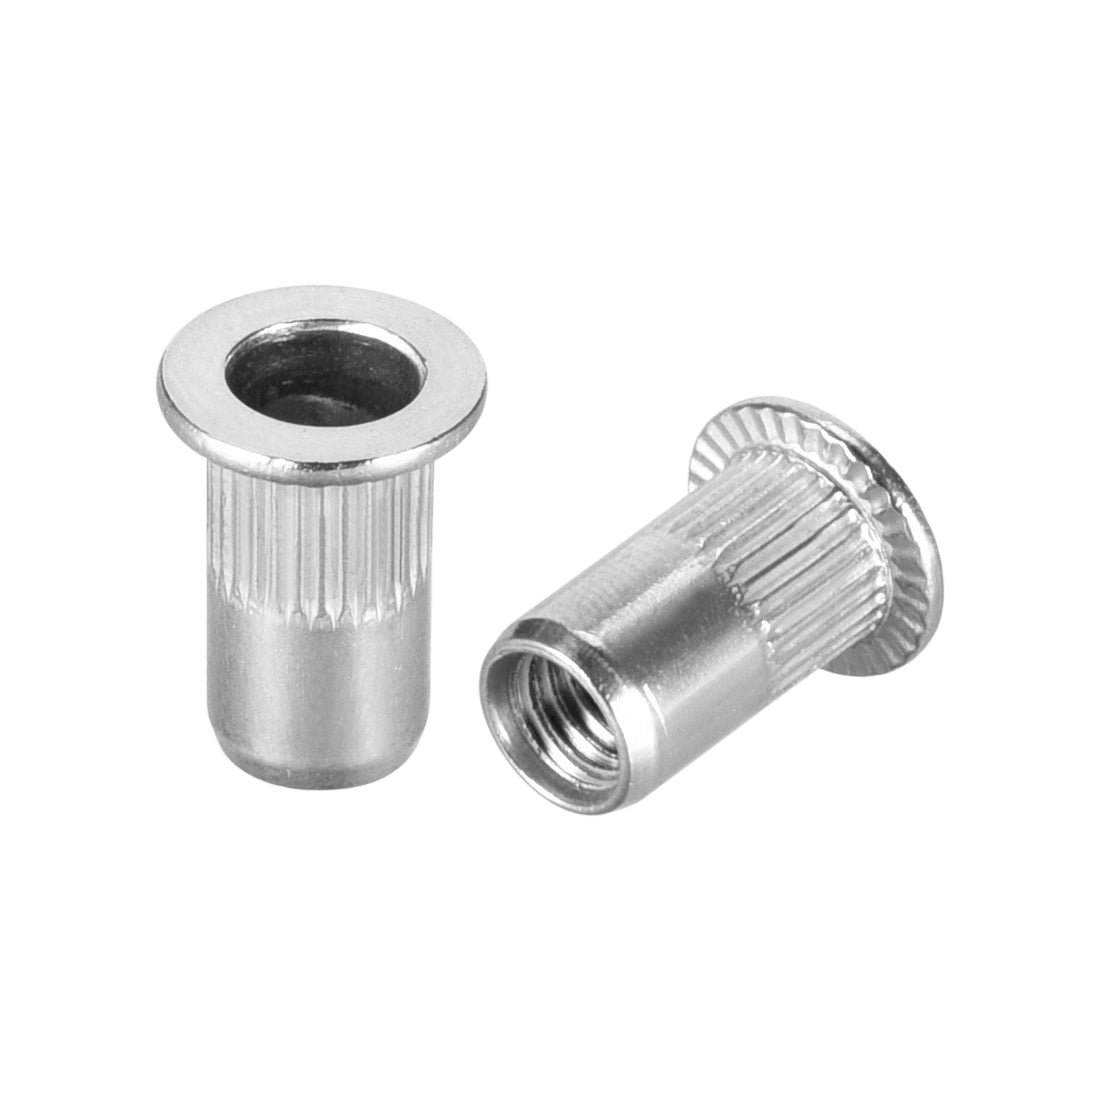 Uxcell Uxcell M5 304 Stainless Steel Rivet Nuts Flat Head Insert  20 Pcs